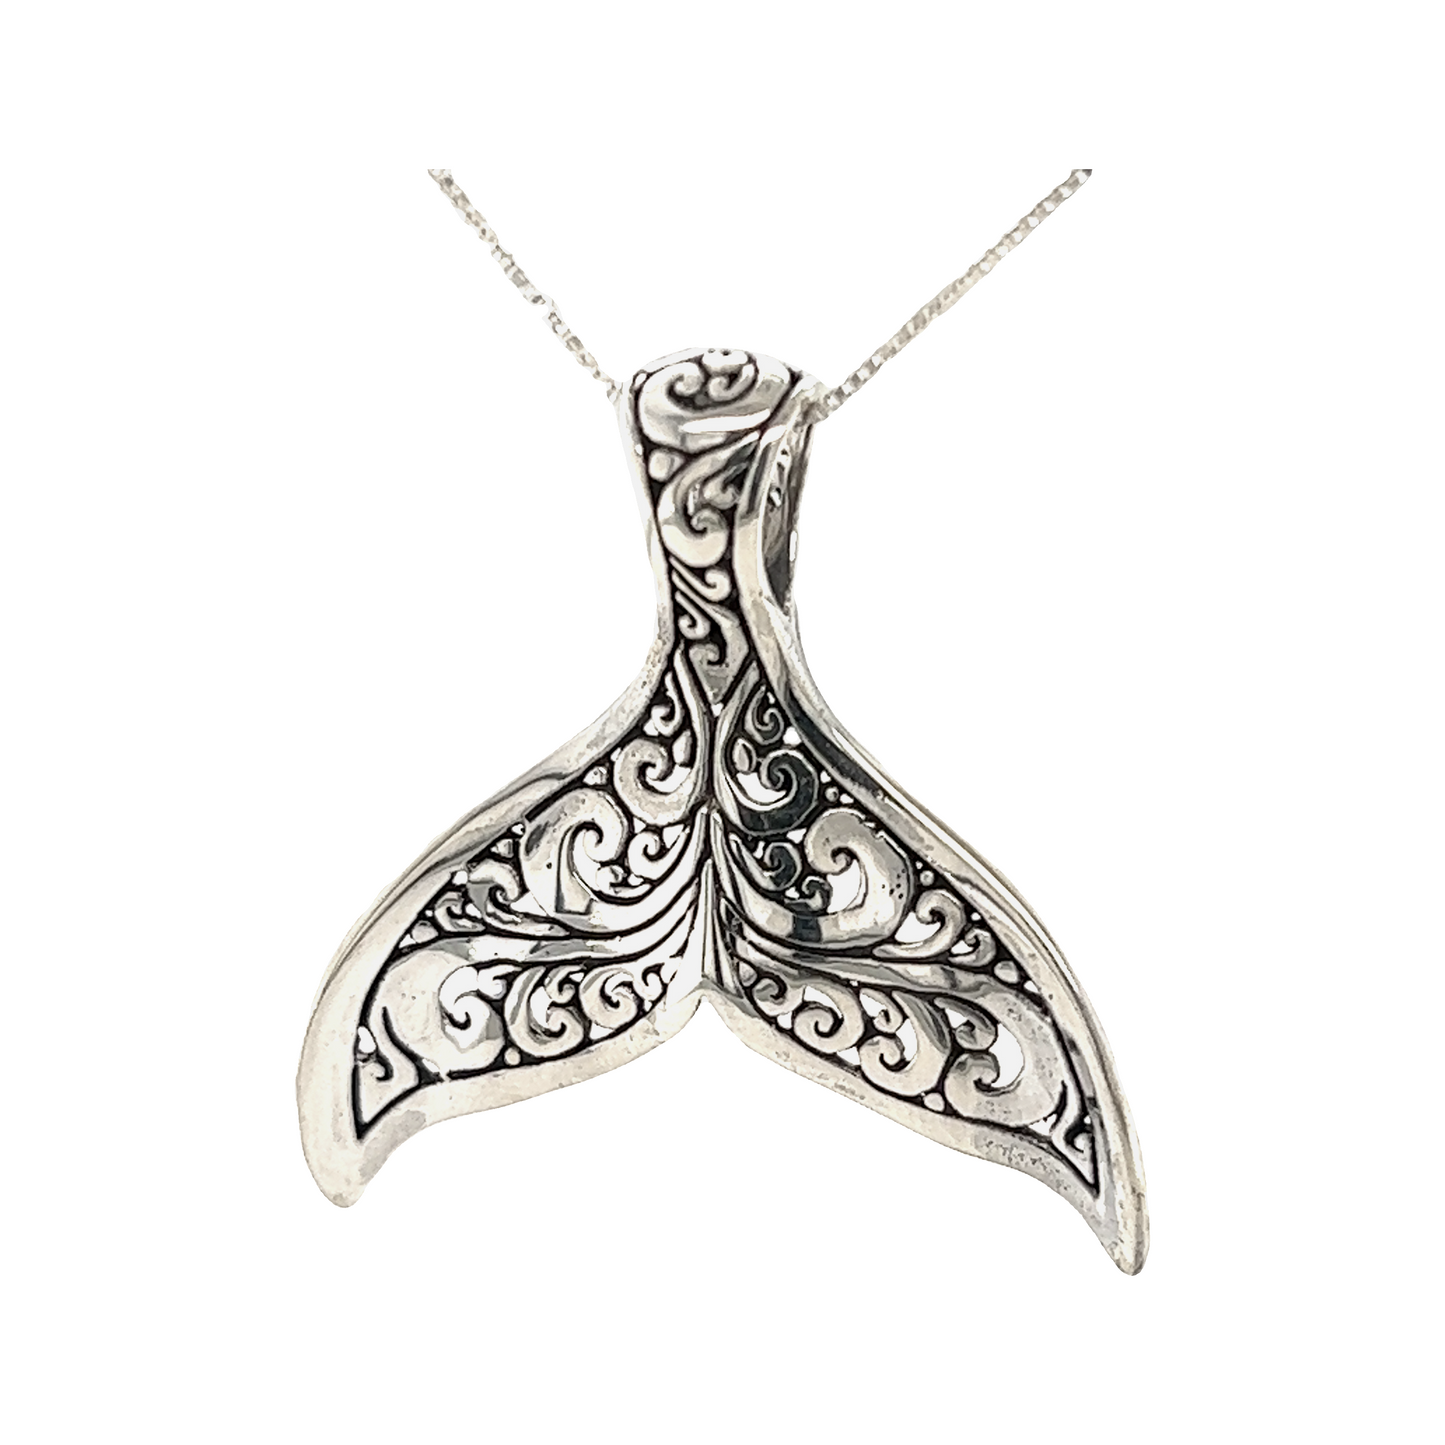 This Super Silver Stunning Full Filigree Whale Tail Pendant showcases intricate ocean-inspired designs.